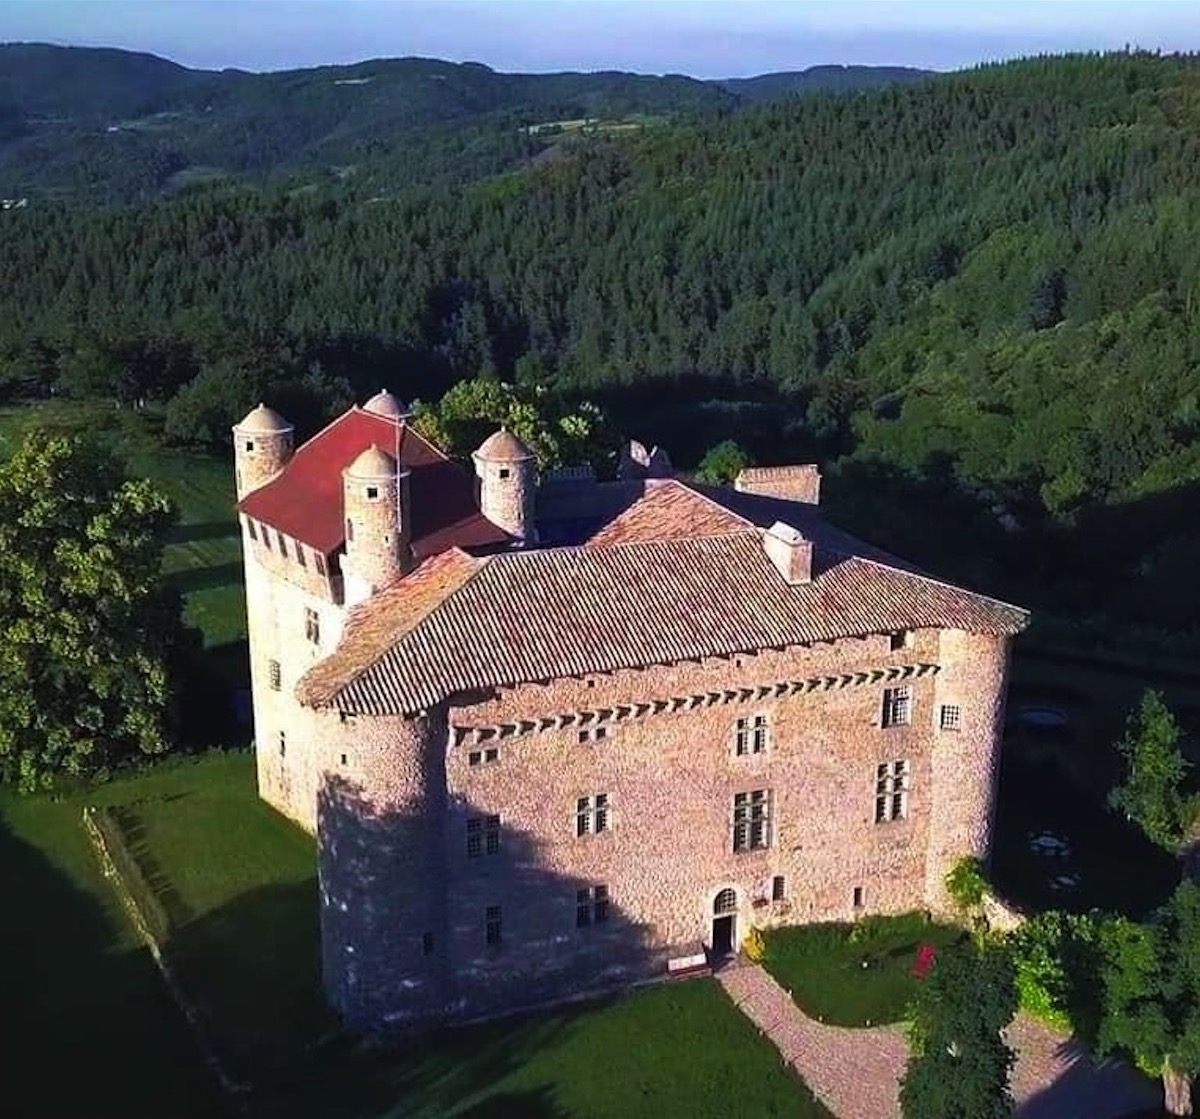 This summer, Take part to a workcamp in the park of a medieval castle in Ardèche, South of France!